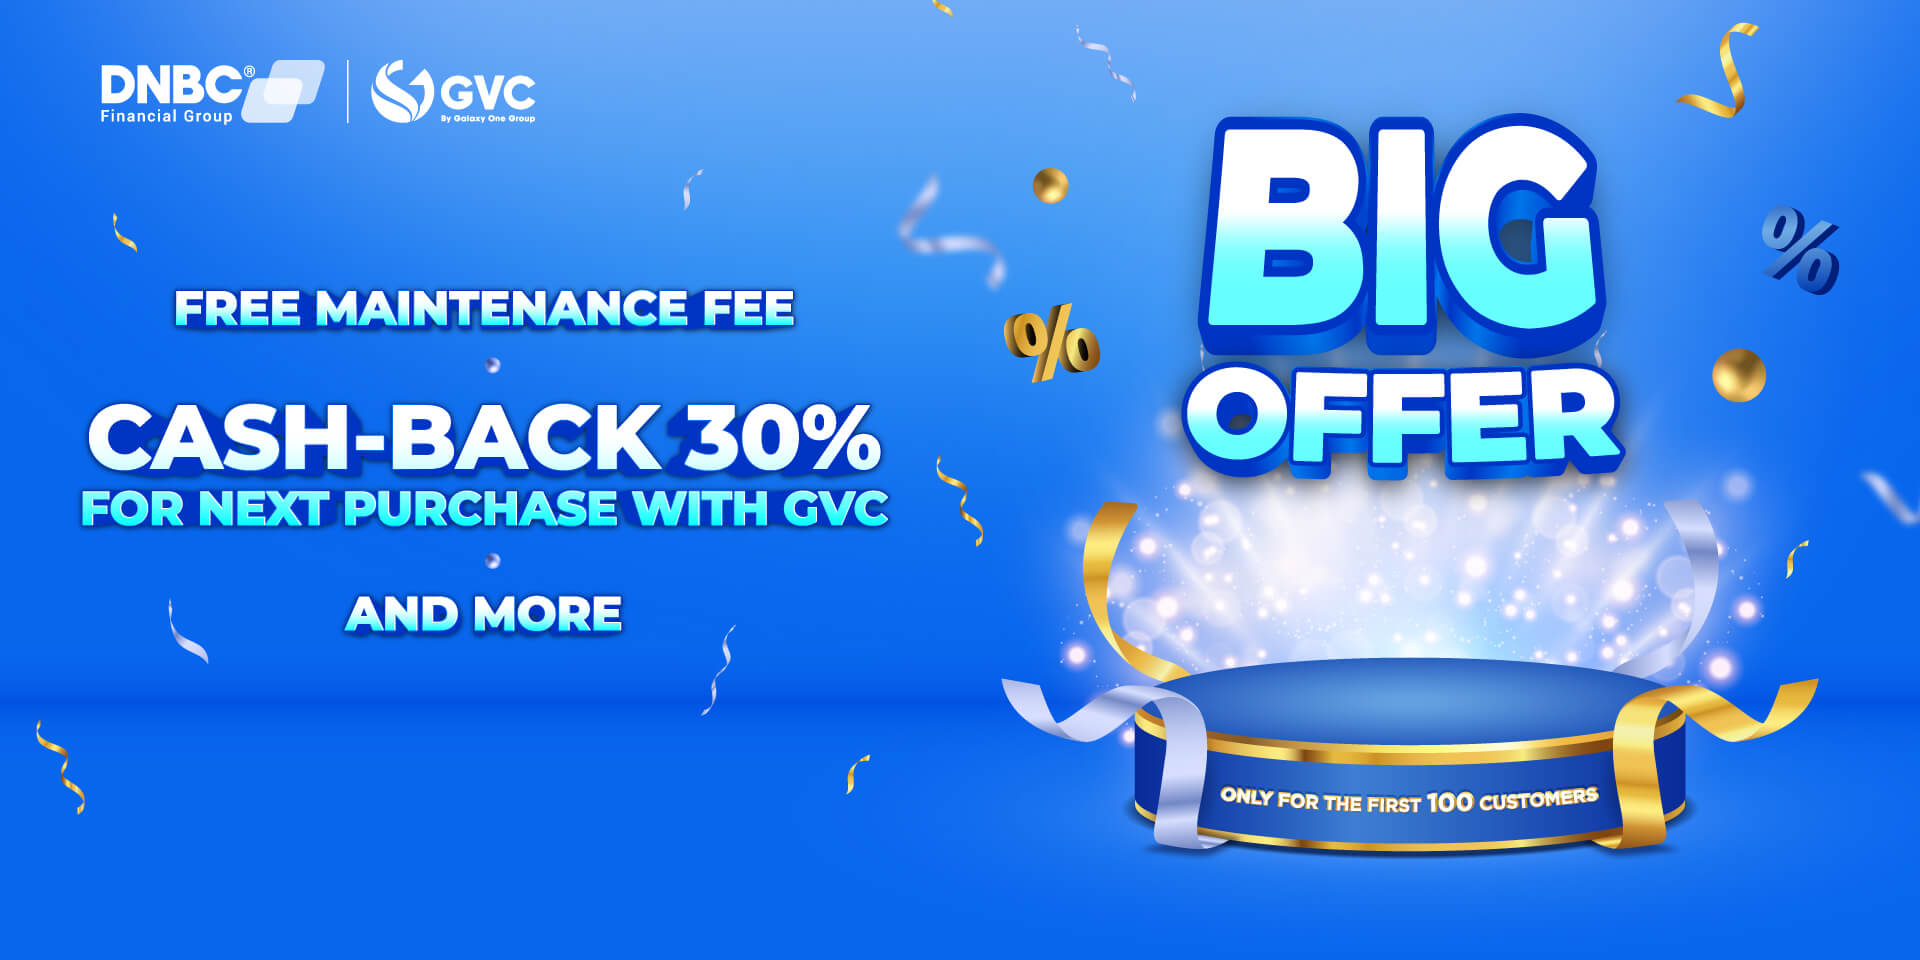 Big offer from DNBC